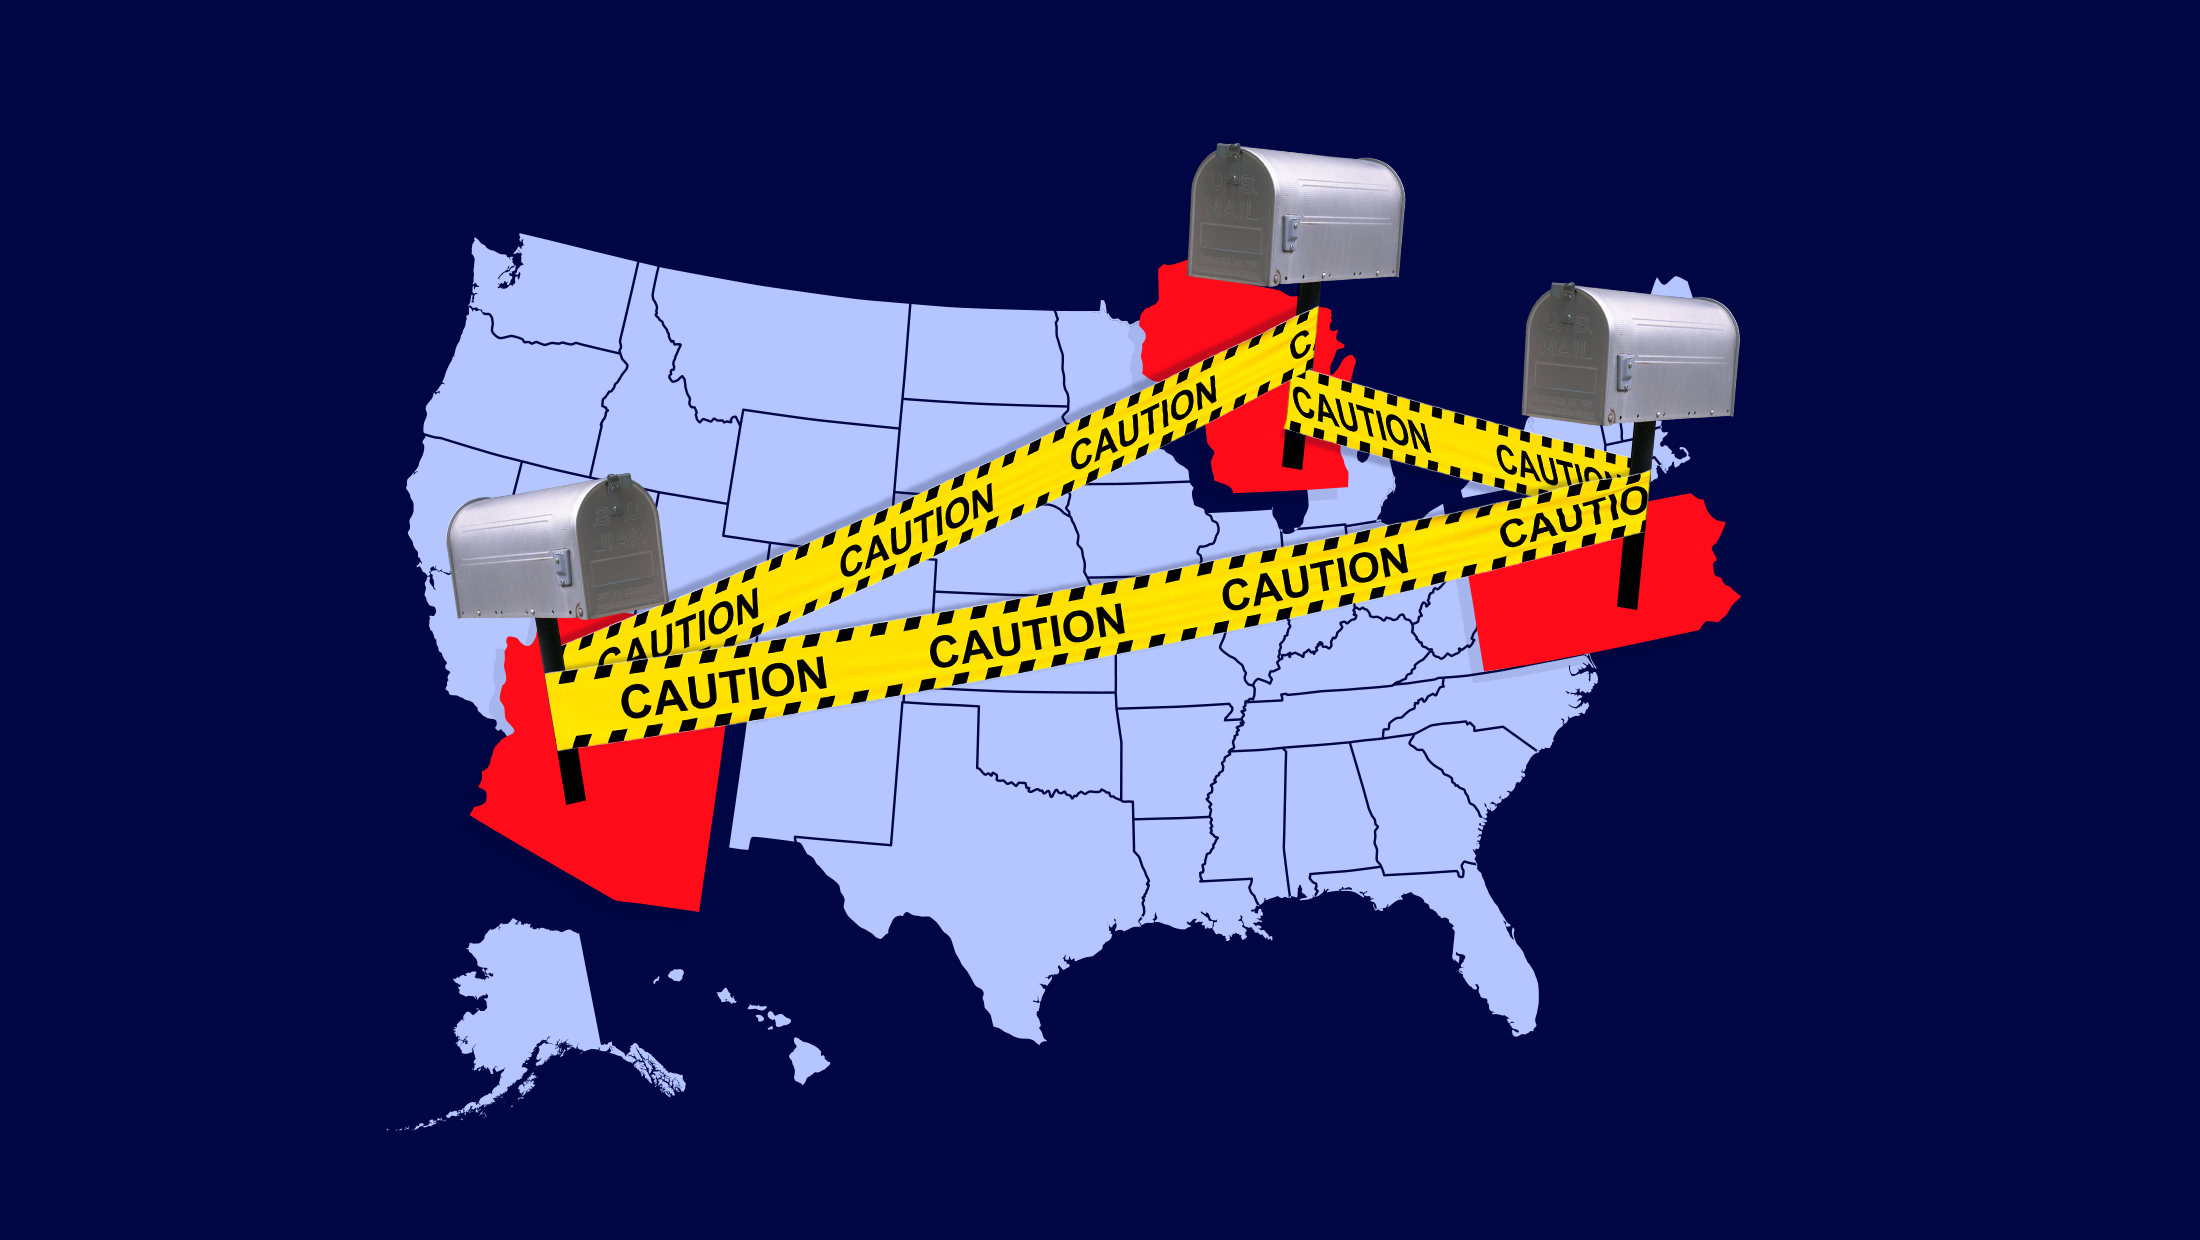 A light purple map of the United States with Arizona, Pennsylvania and Wisconsin highlighted red and larger than the rest. Mailboxes wrapped in caution tape connect between the three states.